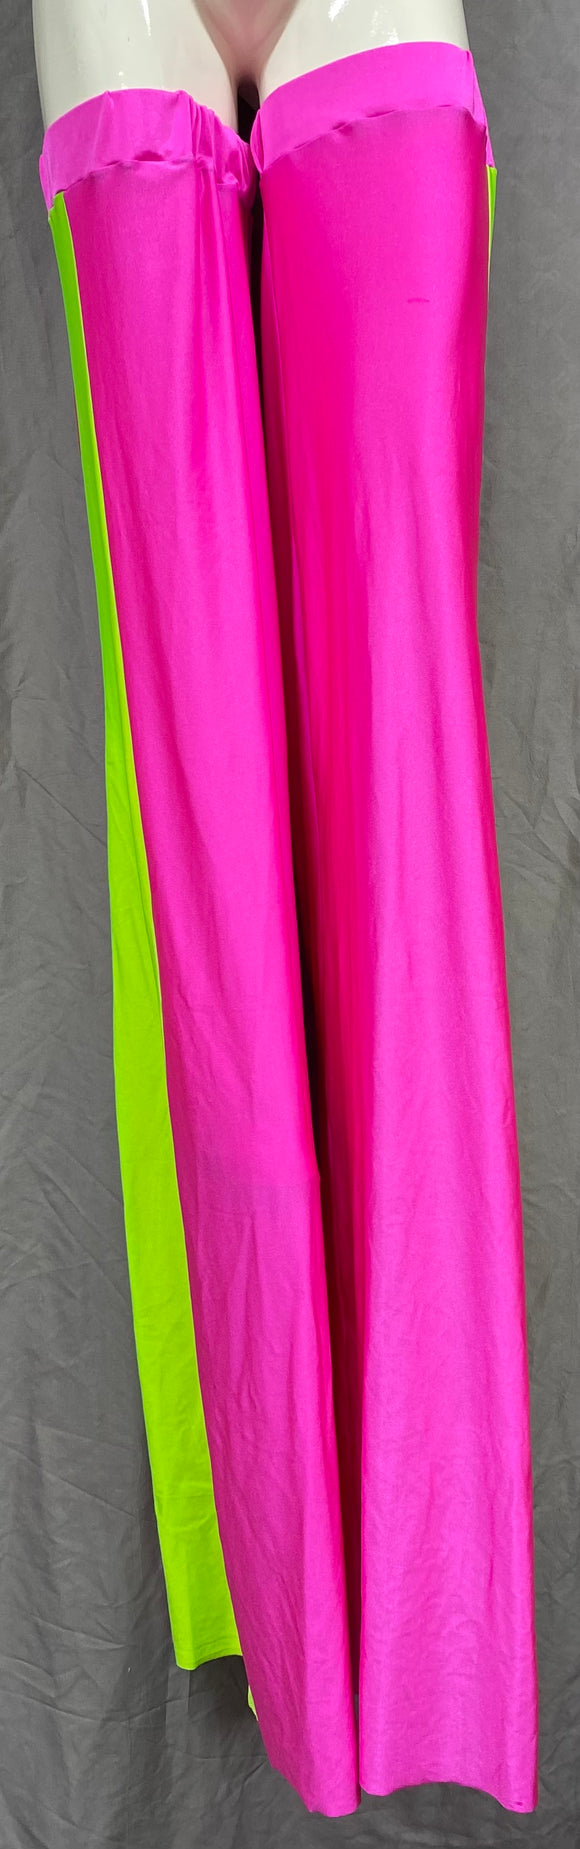 Stilt Covers - Neon Pink with Green 52